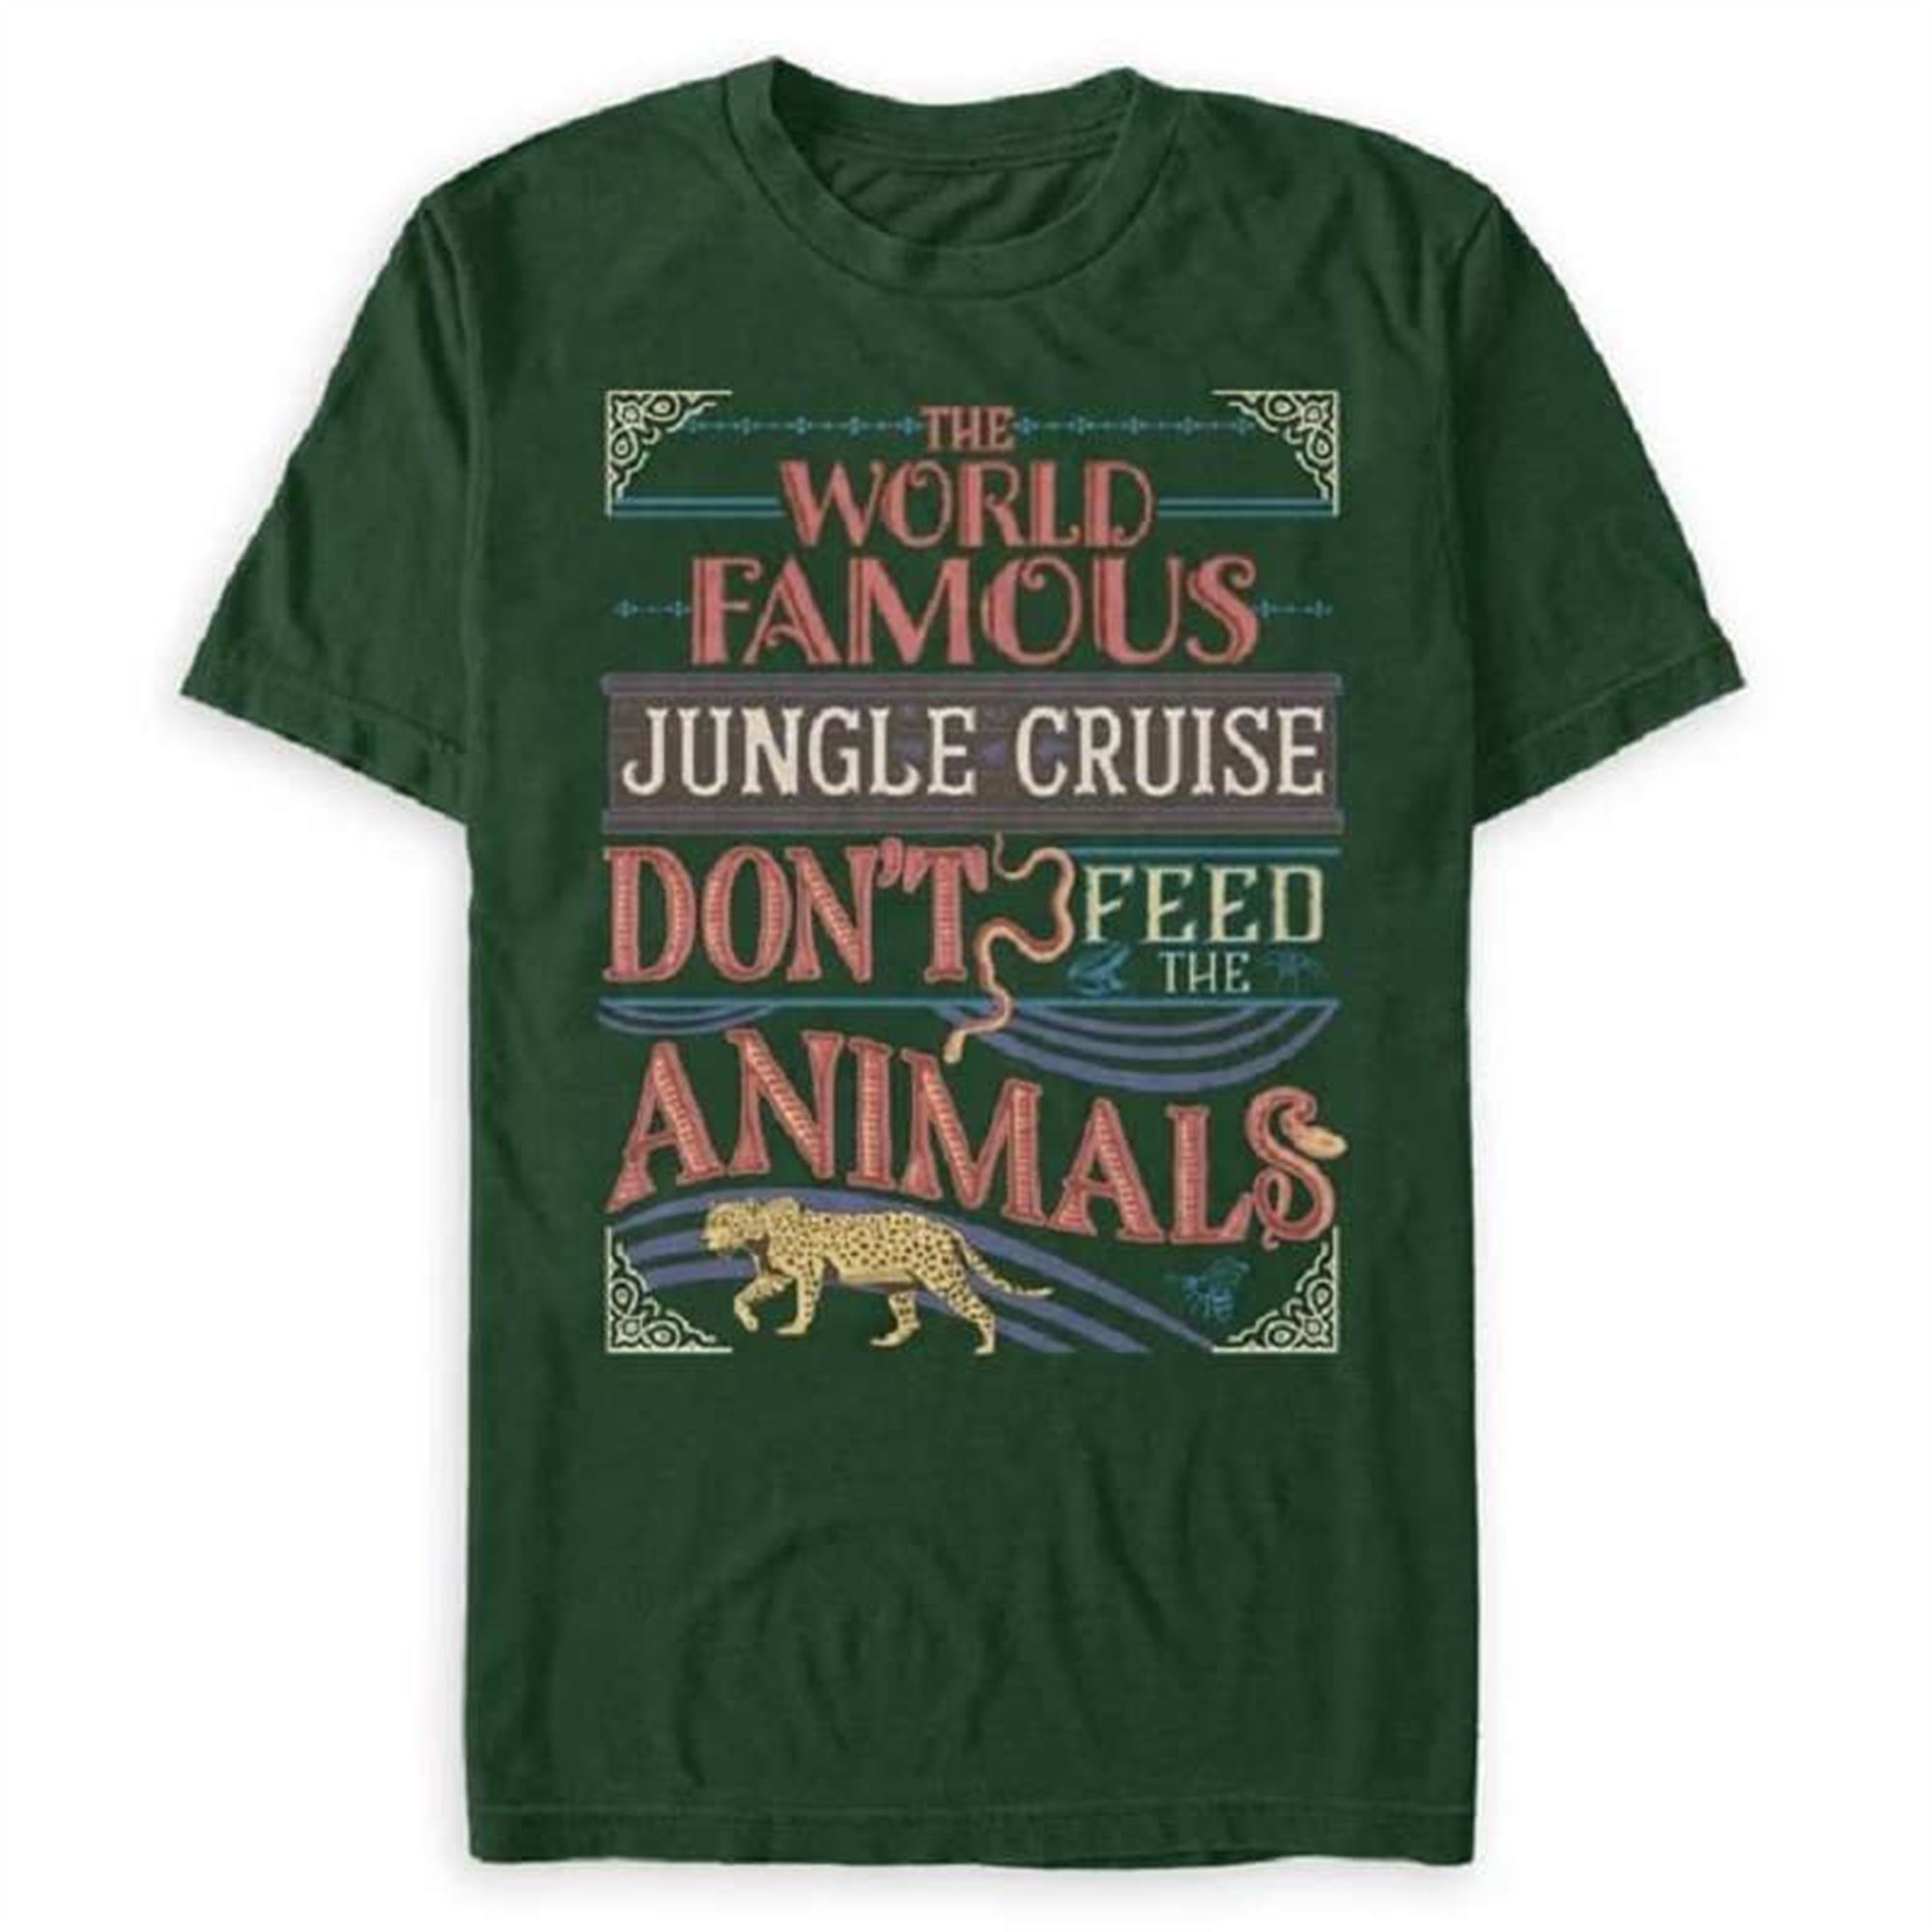 The World Famous Jungle Cruise Animals T-shirt For Adult Plus Size Up To 5xl